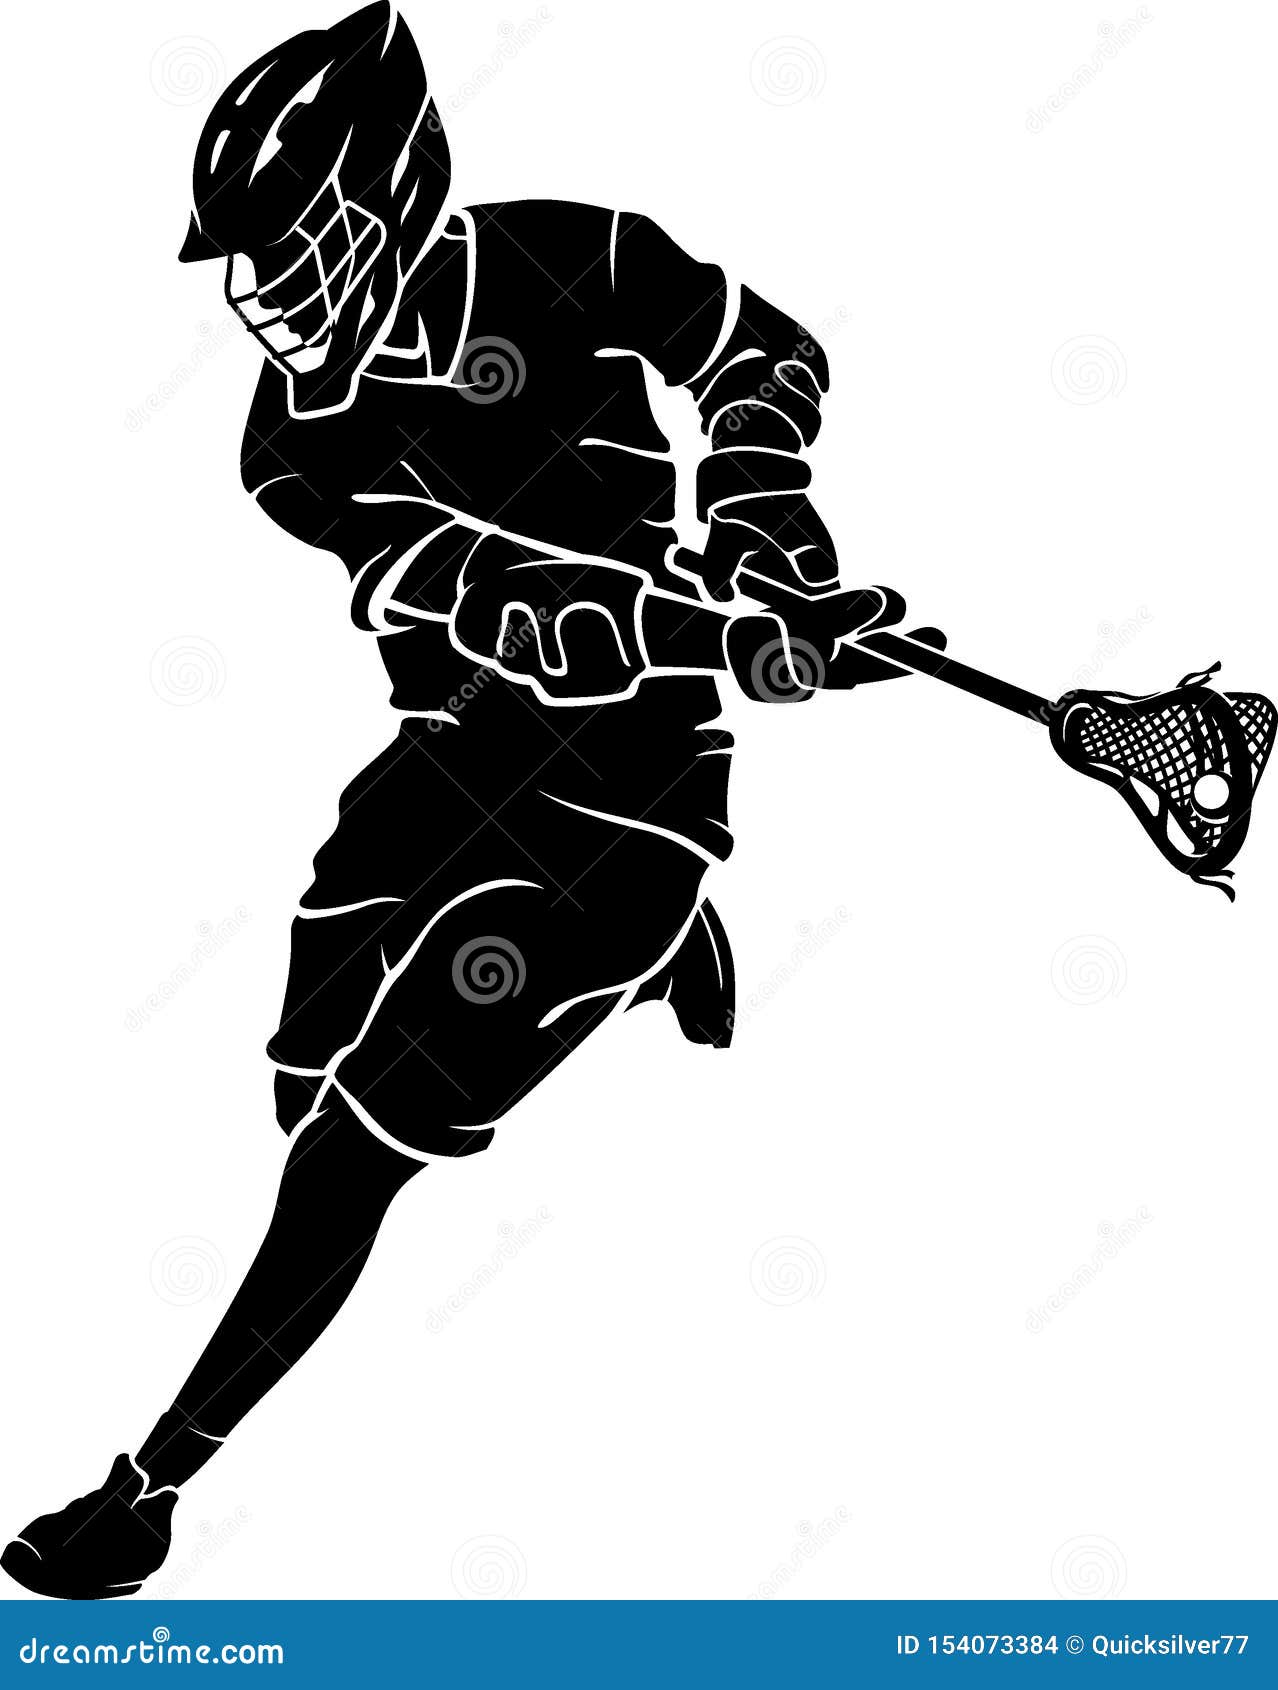 Lacrosse Athlete Play, Aim at Goal Stock Vector - Illustration of elbow ...